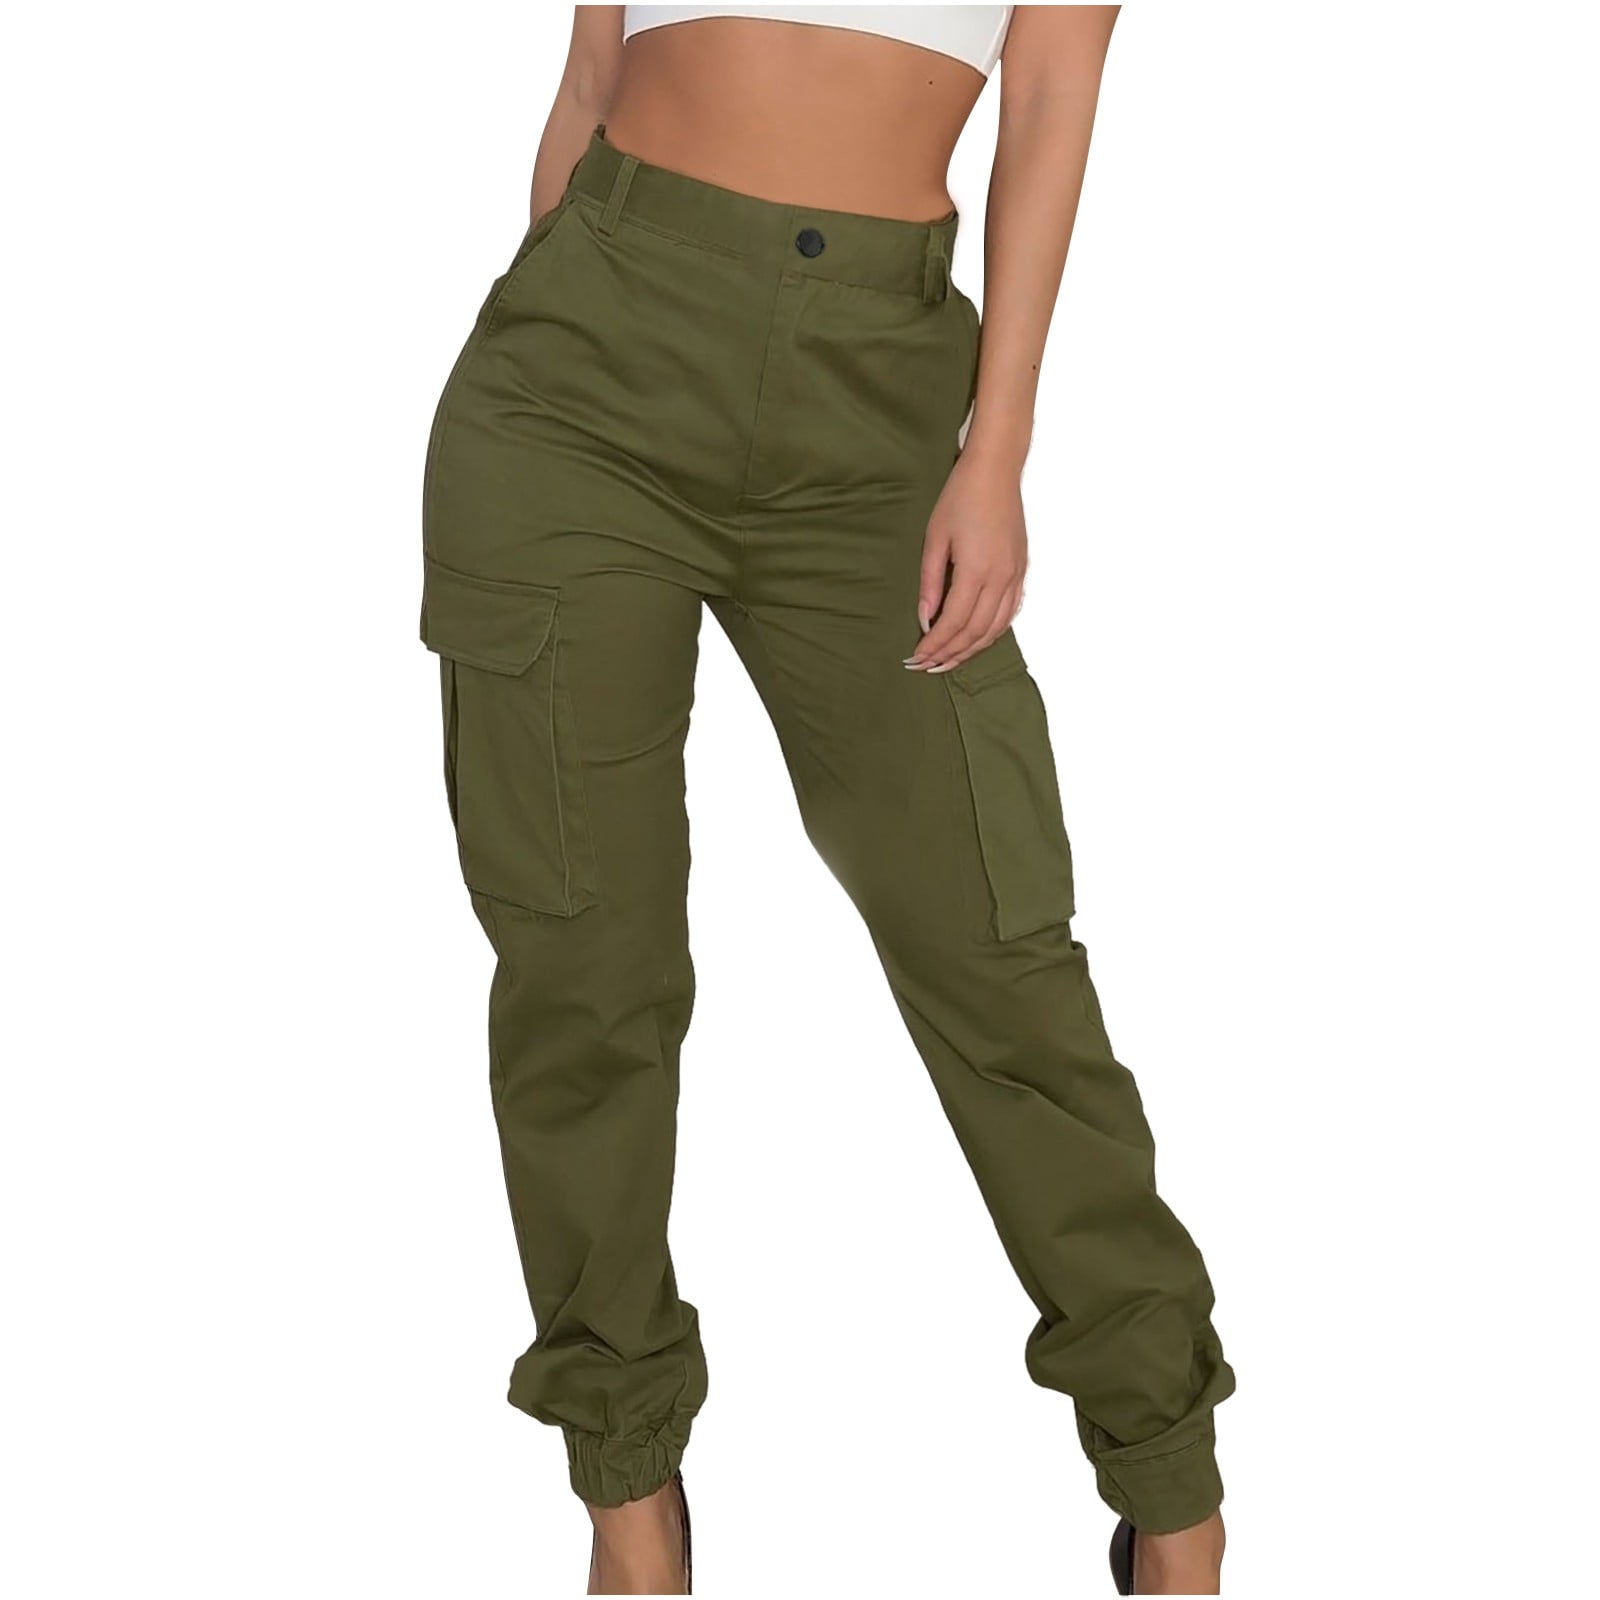 Womens Stretchy Skinny Cargo Pants Casual High Waist Drawstring Joggers  Pants Lightweight Hiking Trousers with Pockets